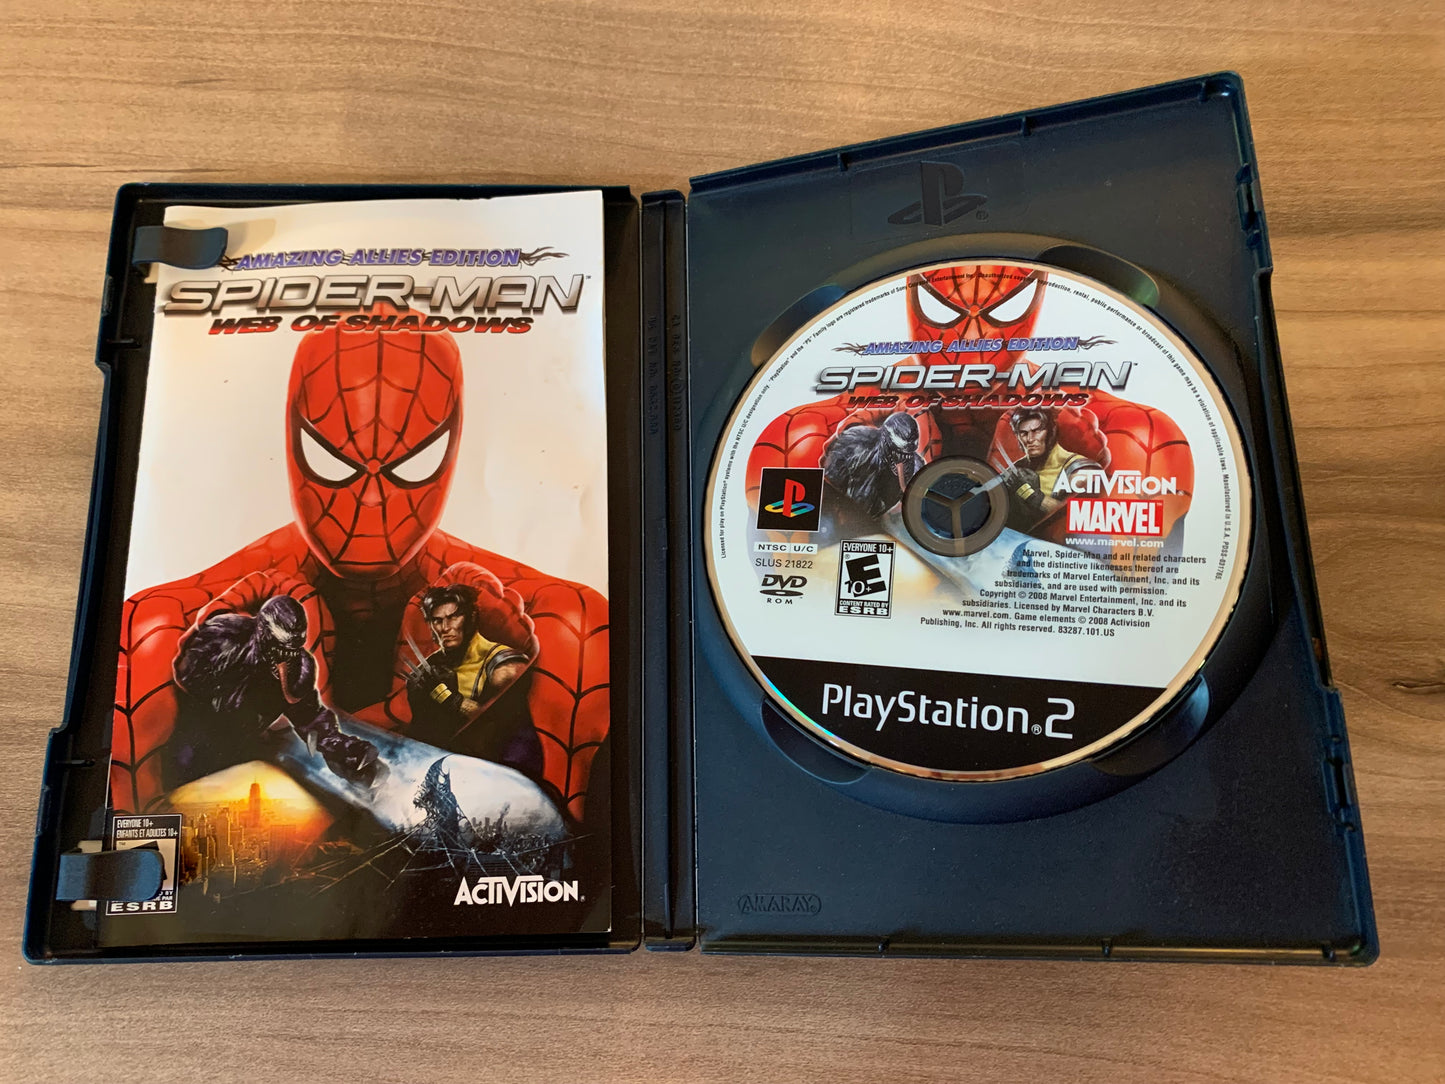 SONY PLAYSTATiON 2 [PS2] | SPiDER-MAN WEB OF SHADOWS AMAZiNG ALLiES EDiTiON